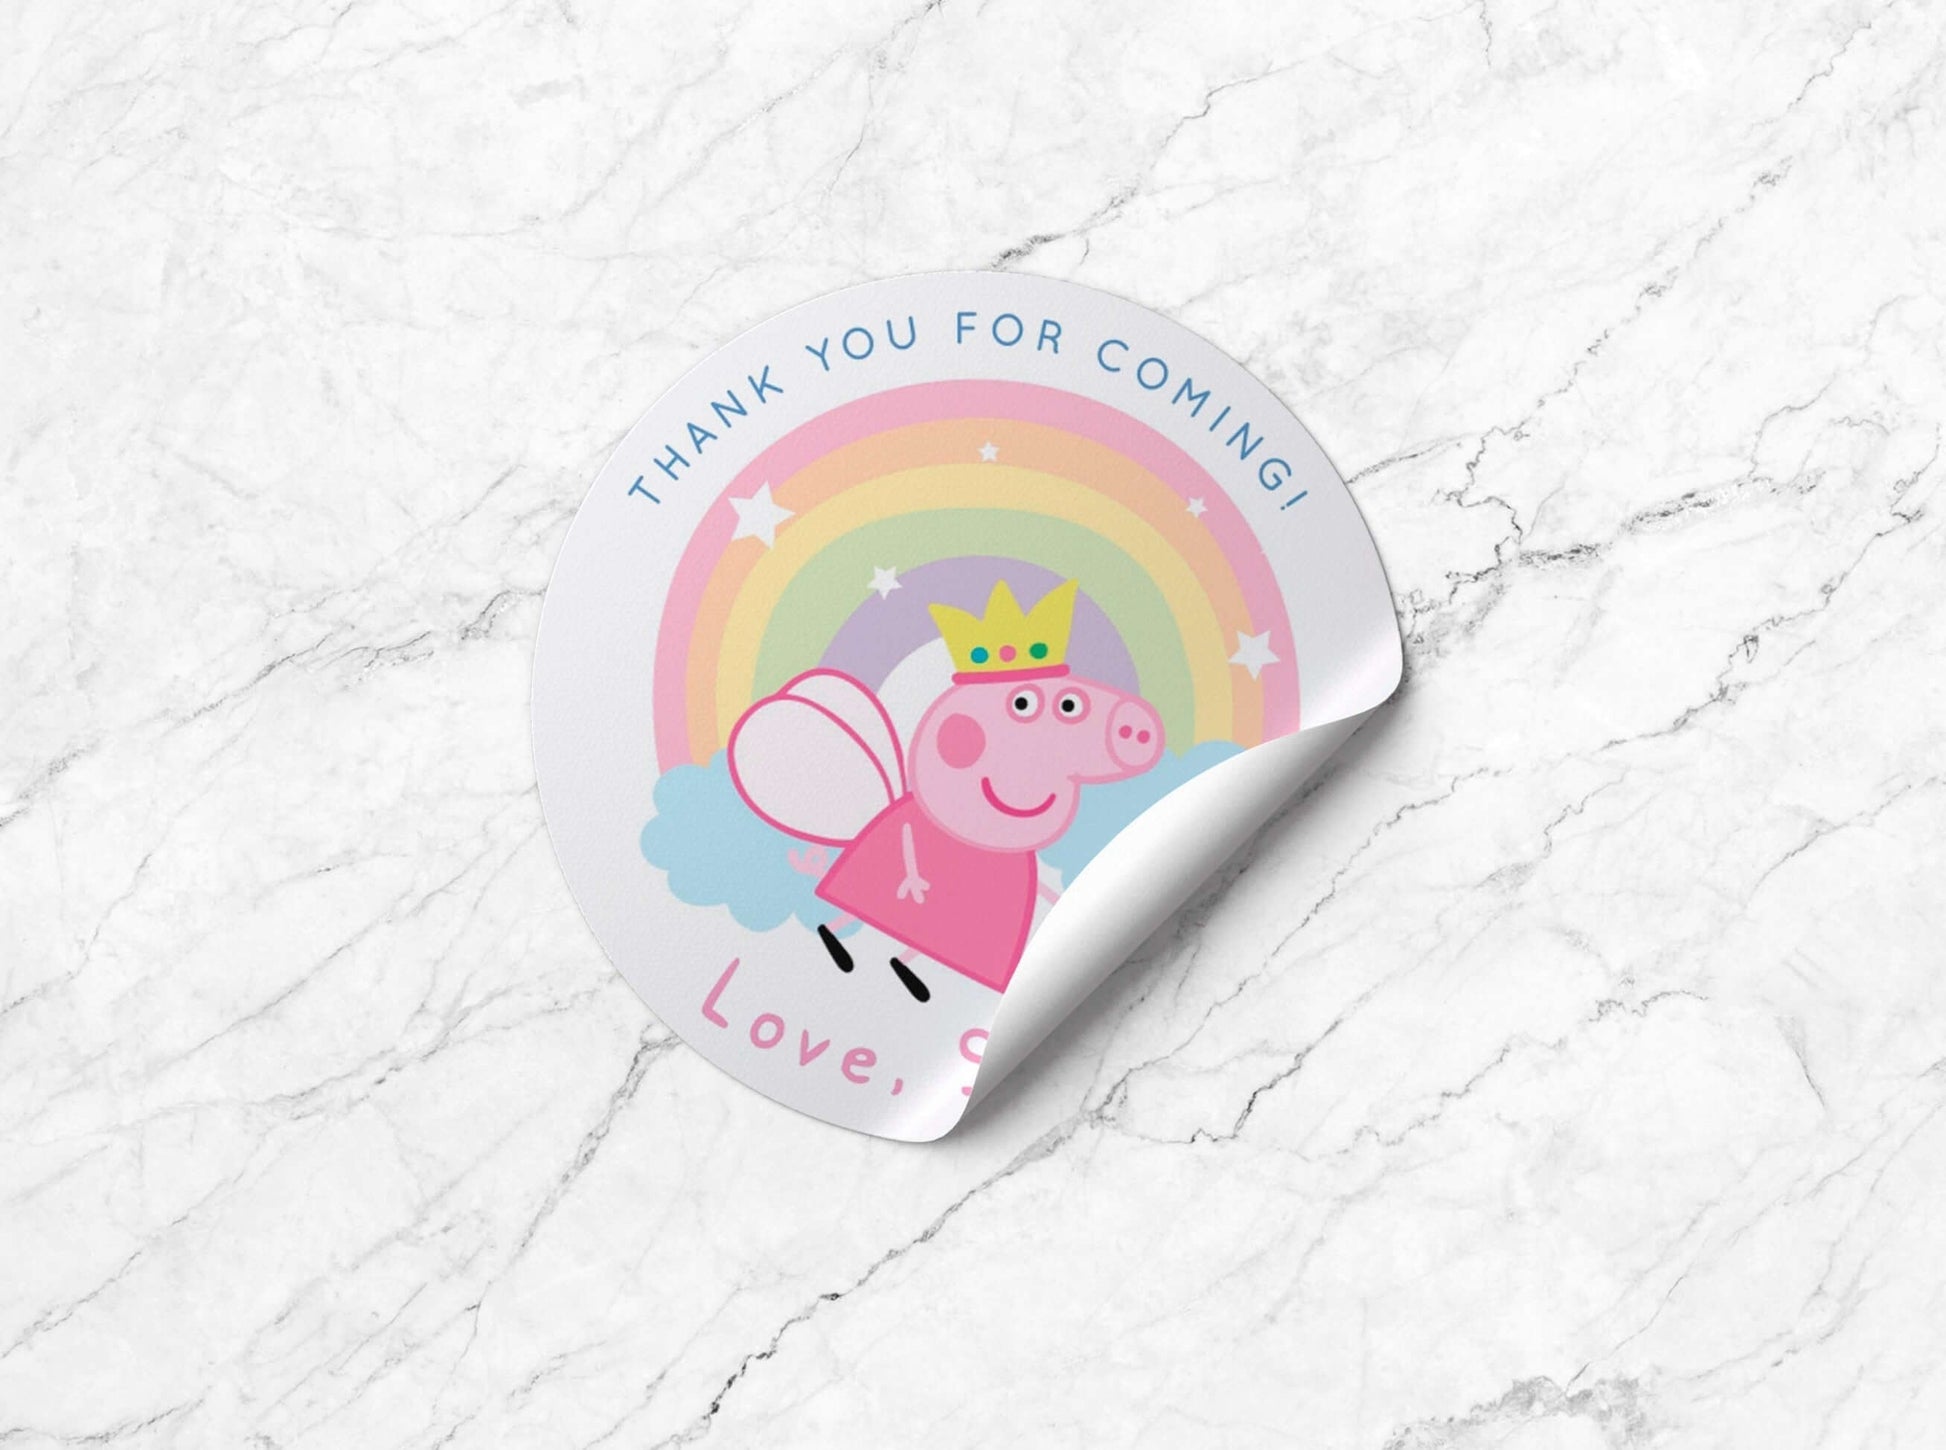 FAIRY PEPPA Pig 2" Thank You Tag ★ Instant Download | Editable Text - Digitally Printables